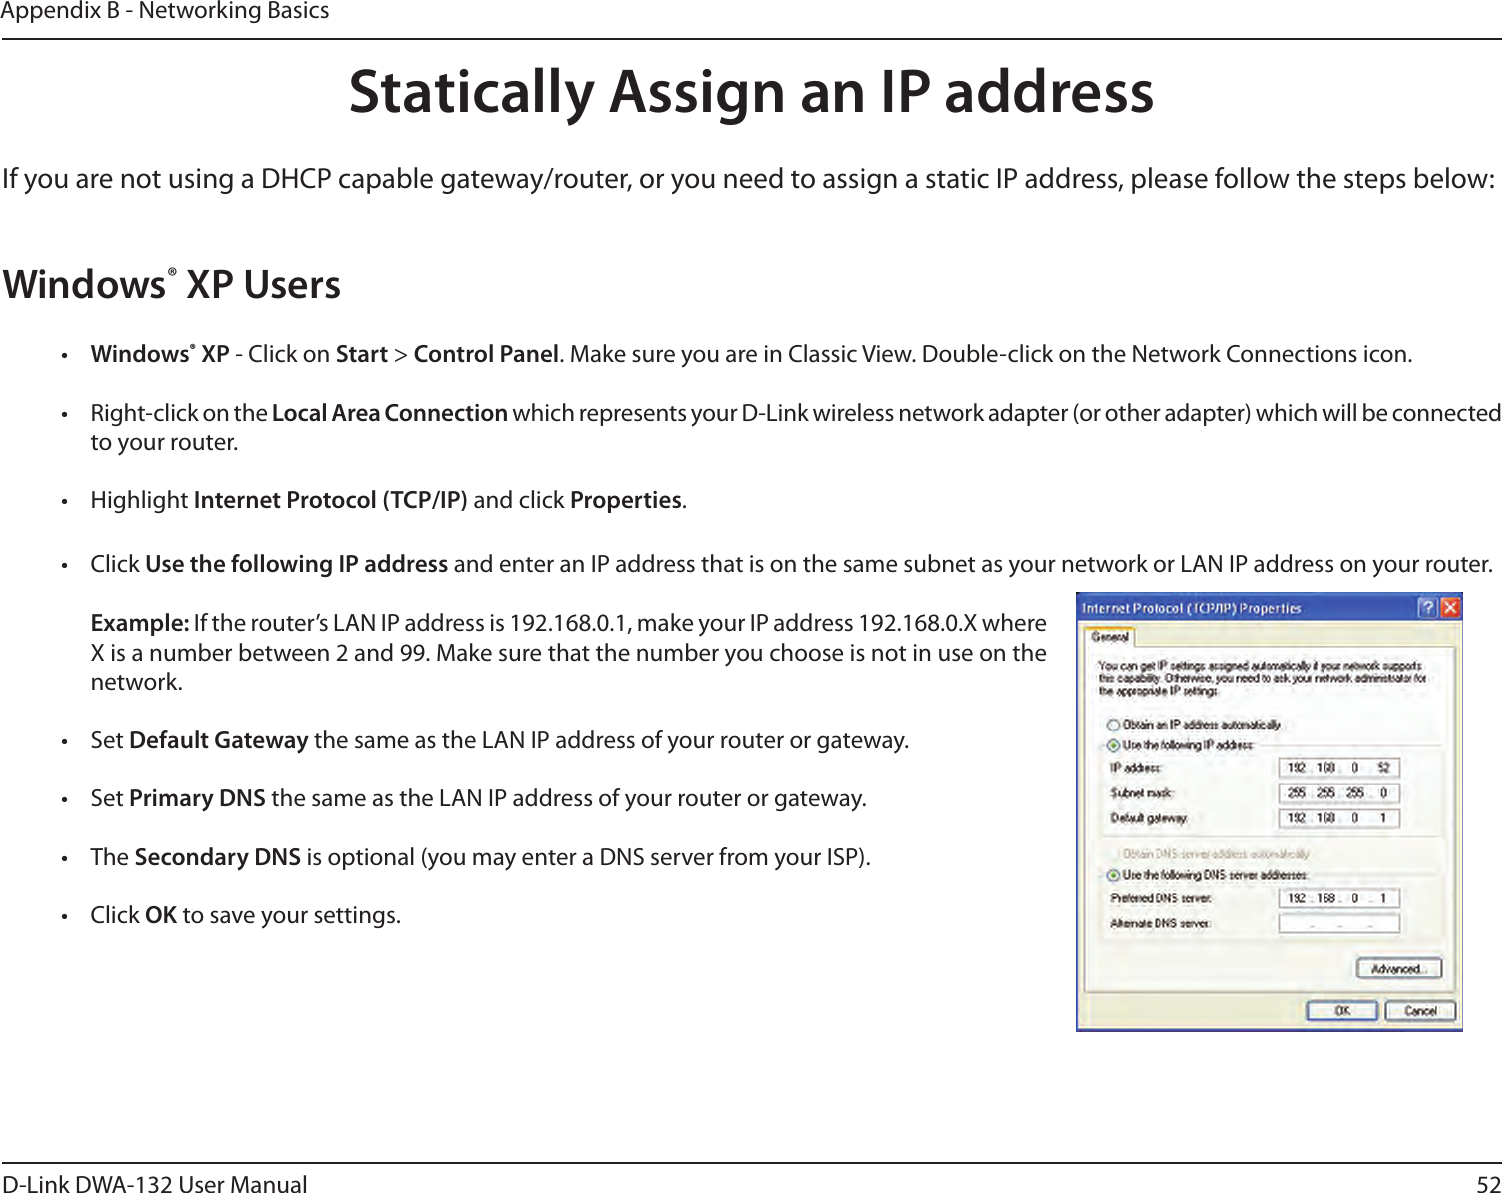 52D-Link DWA-132 User ManualAppendix B - Networking BasicsStatically Assign an IP addressIf you are not using a DHCP capable gateway/router, or you need to assign a static IP address, please follow the steps below:Windows® XP Users•  Windows® XP - Click on Start &gt; Control Panel. Make sure you are in Classic View. Double-click on the Network Connections icon.•  Right-click on the Local Area Connection which represents your D-Link wireless network adapter (or other adapter) which will be connected to your router.•  Highlight Internet Protocol (TCP/IP) and click Properties.•  Click Use the following IP address and enter an IP address that is on the same subnet as your network or LAN IP address on your router. Example: If the router’s LAN IP address is 192.168.0.1, make your IP address 192.168.0.X where X is a number between 2 and 99. Make sure that the number you choose is not in use on the network. •  Set Default Gateway the same as the LAN IP address of your router or gateway.•  Set Primary DNS the same as the LAN IP address of your router or gateway. •  The Secondary DNS is optional (you may enter a DNS server from your ISP).•  Click OK to save your settings.